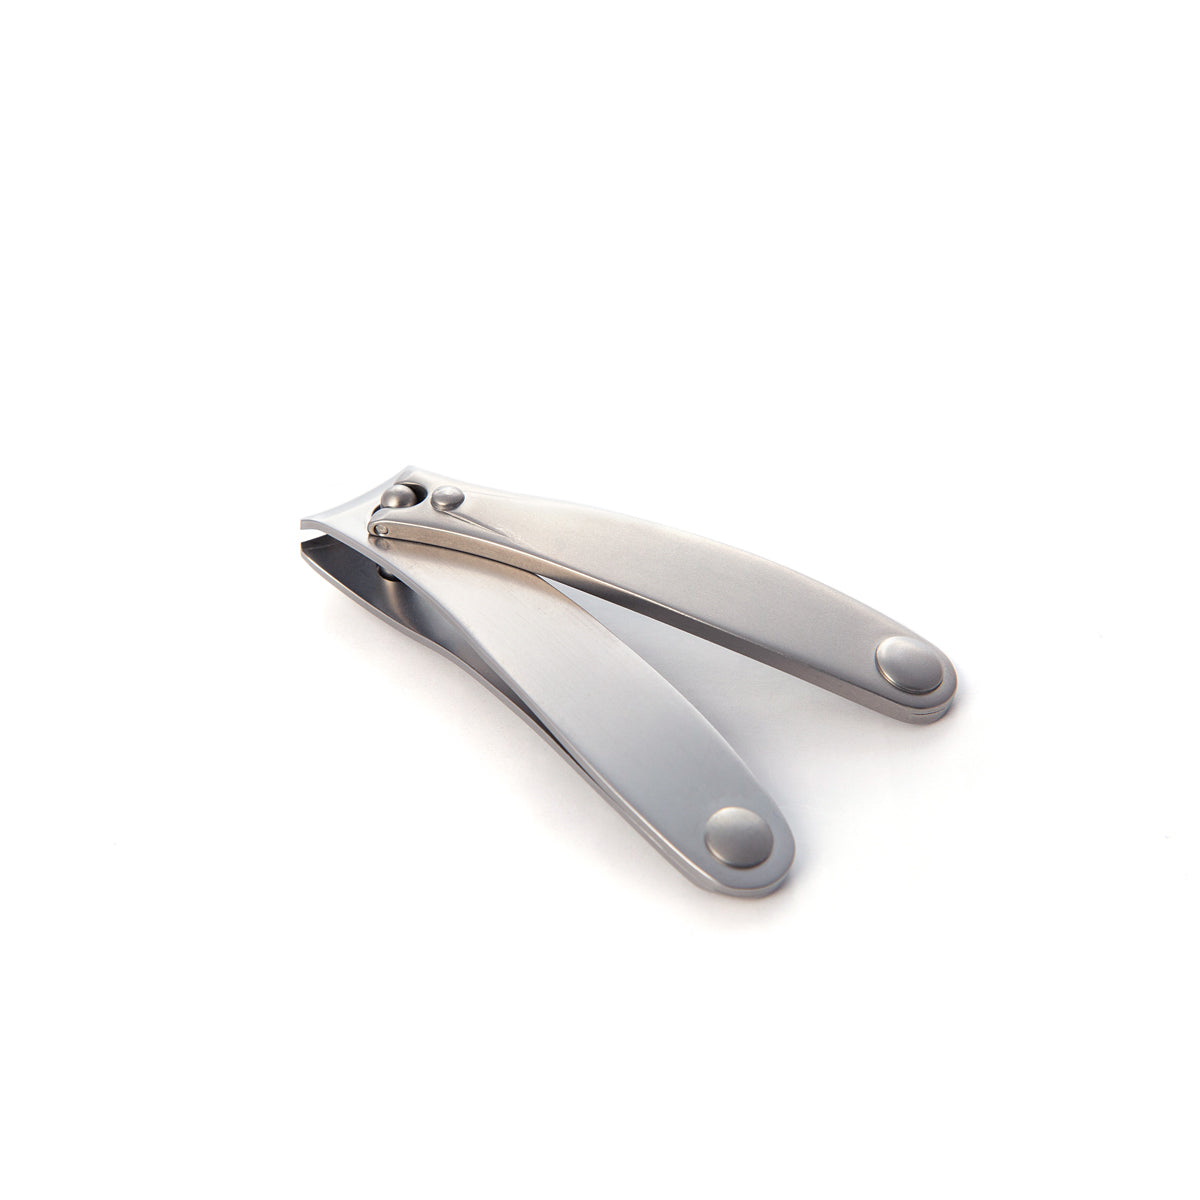 Hardened Stainless Steel Nail Clippers (S)